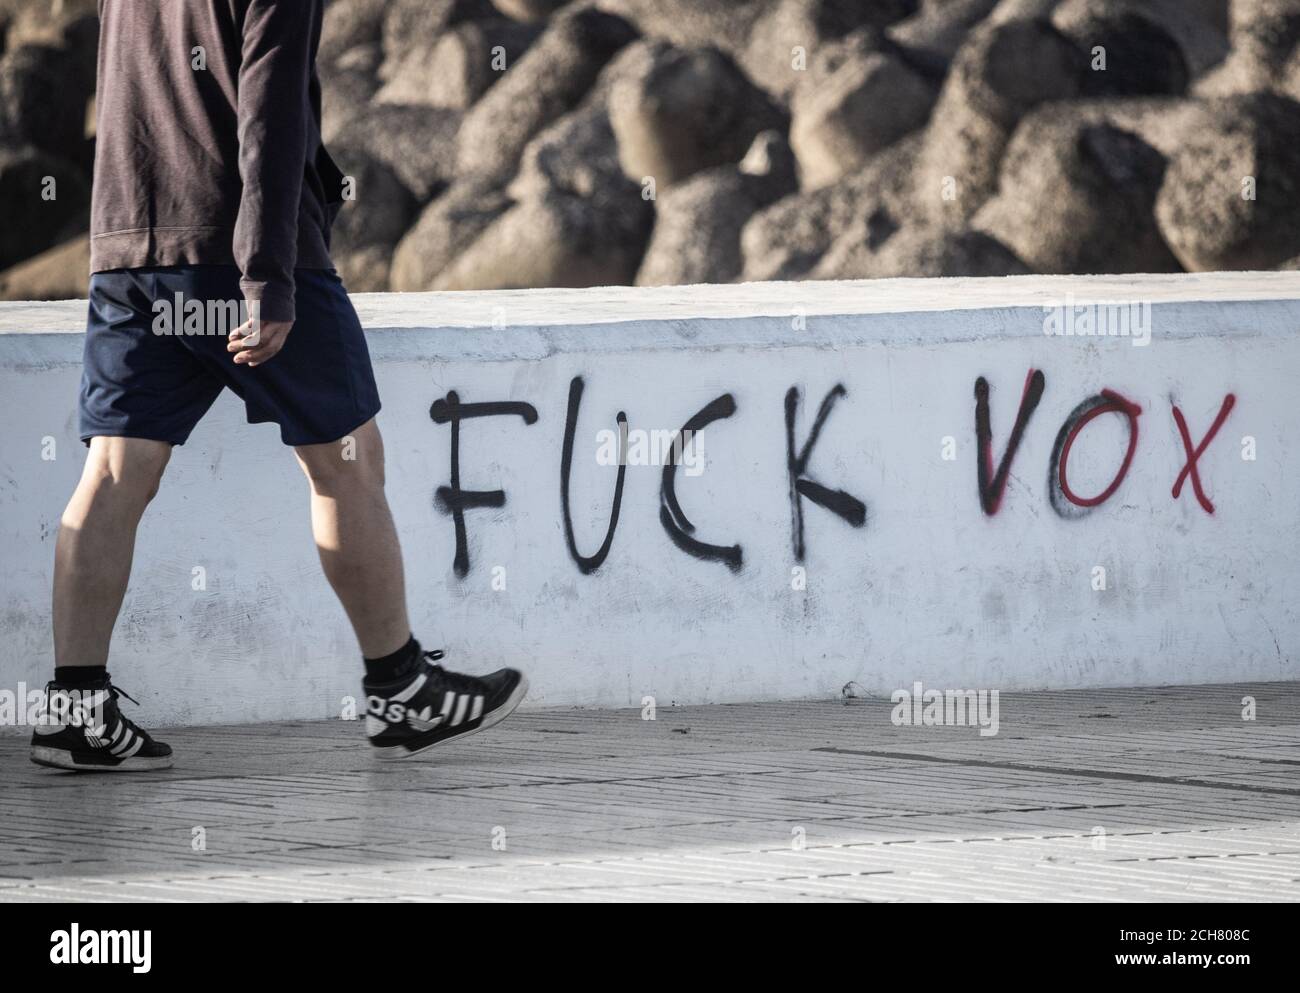 Anti Vox graffiti on wall in Spain. Vox is a right of centre political party in Spain Stock Photo